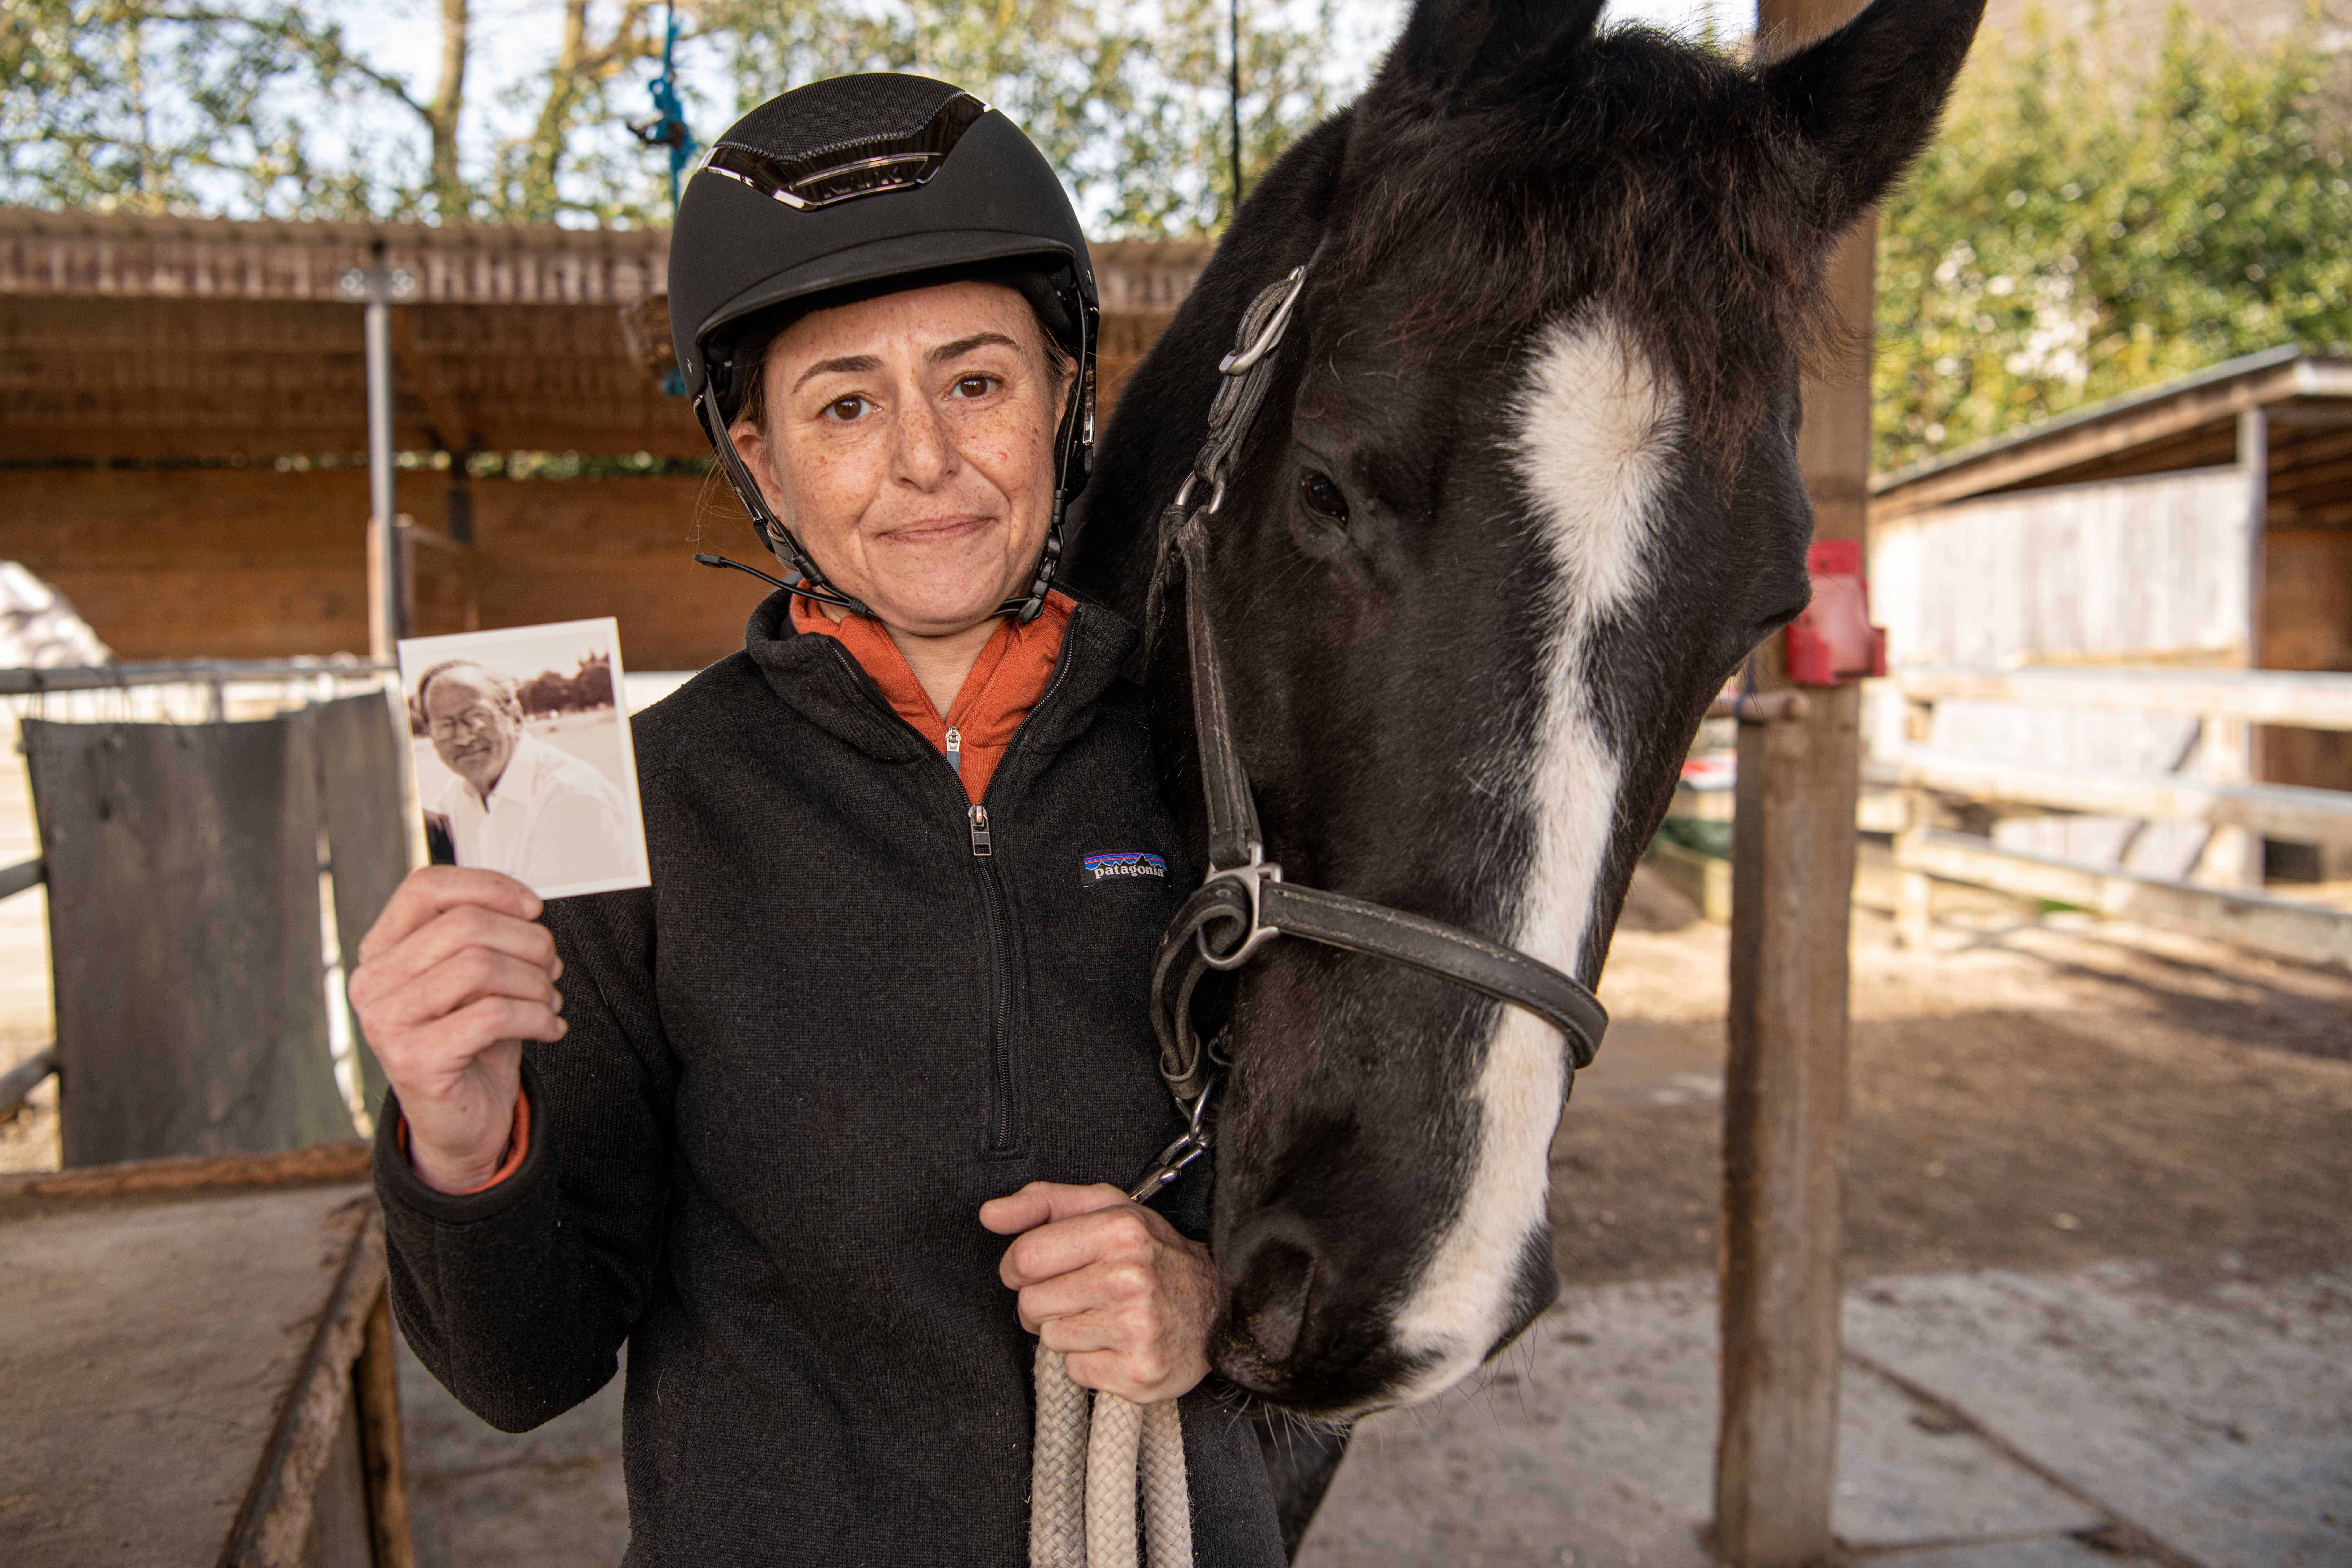 Woman smiling with her horse next to her while holding up a picture of her late father in her hand.